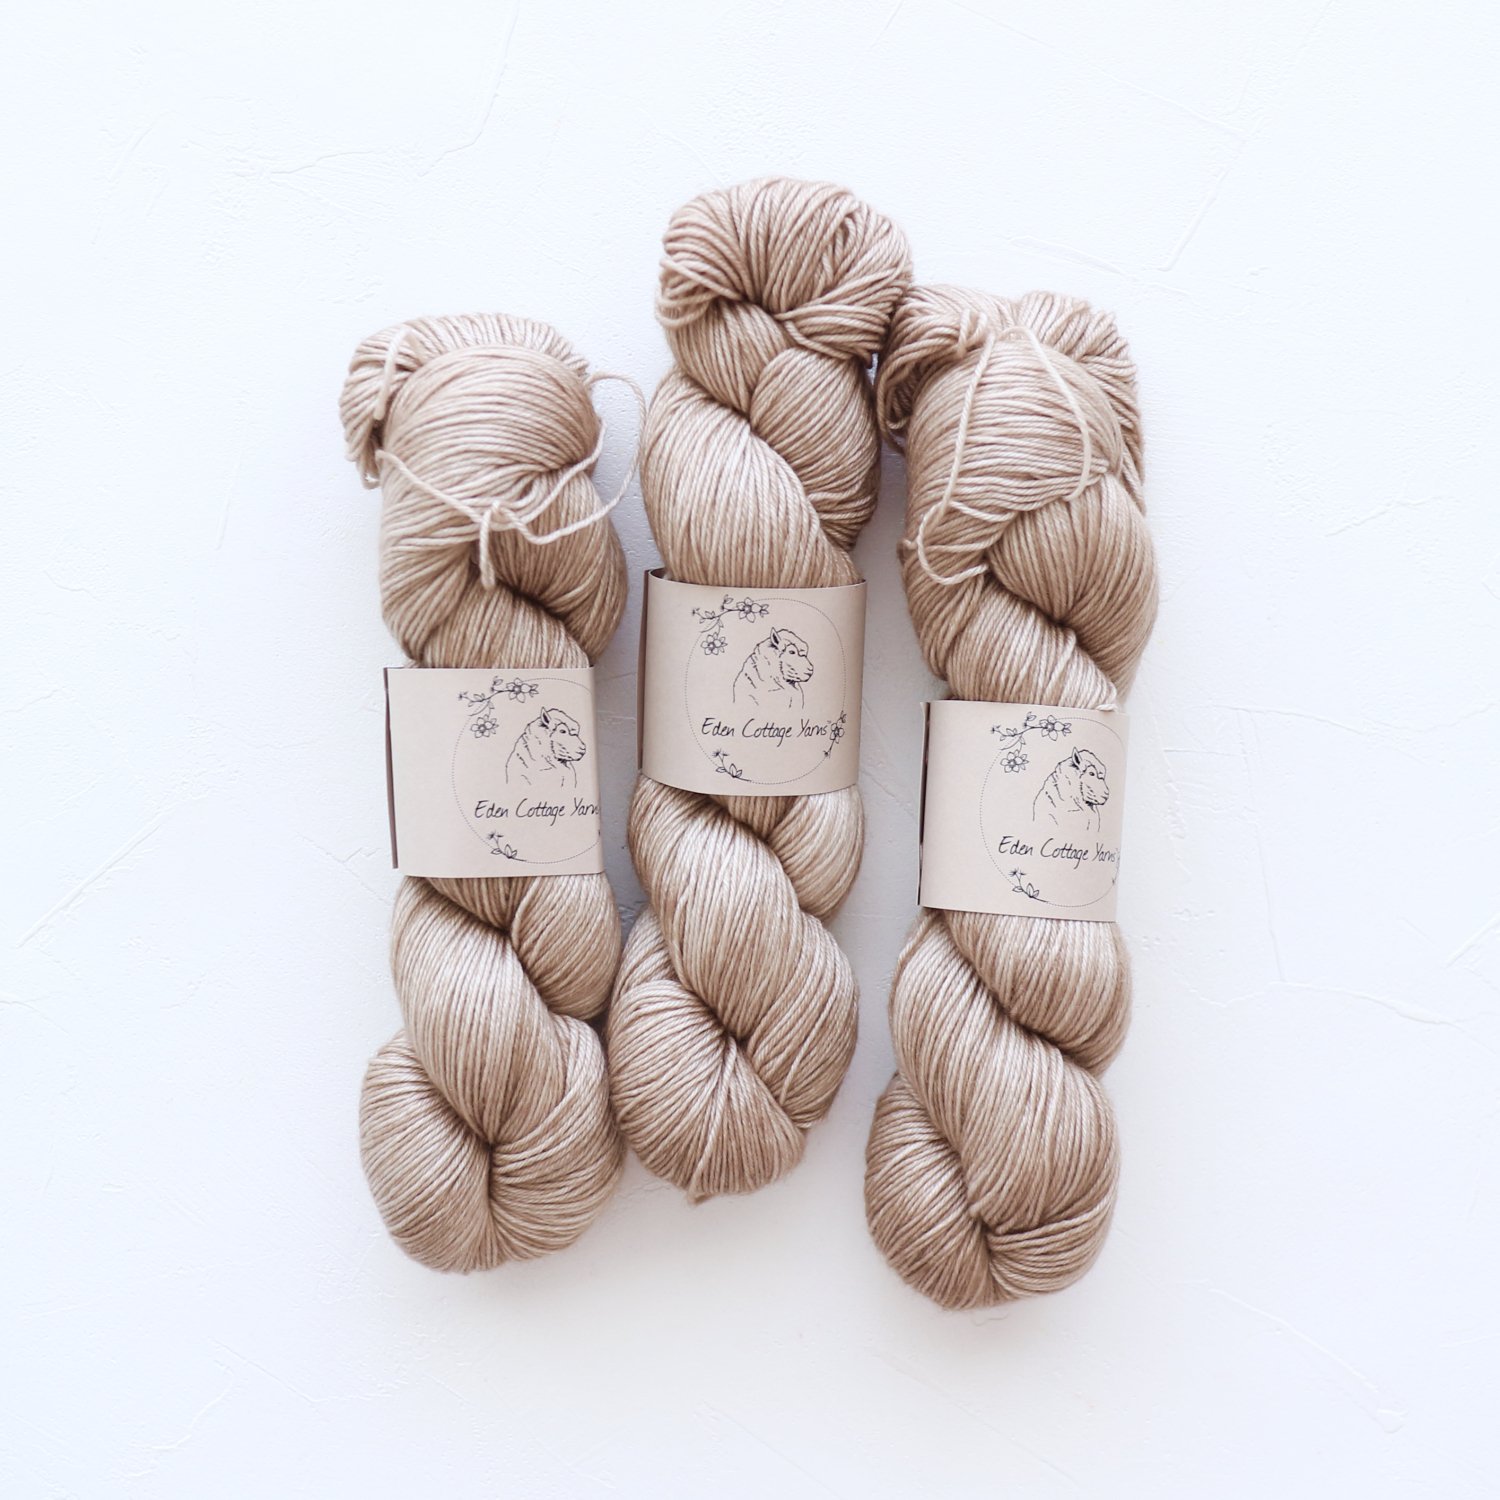 Eden Cottage Yarns<br>Pendle 4ply<br>Stone